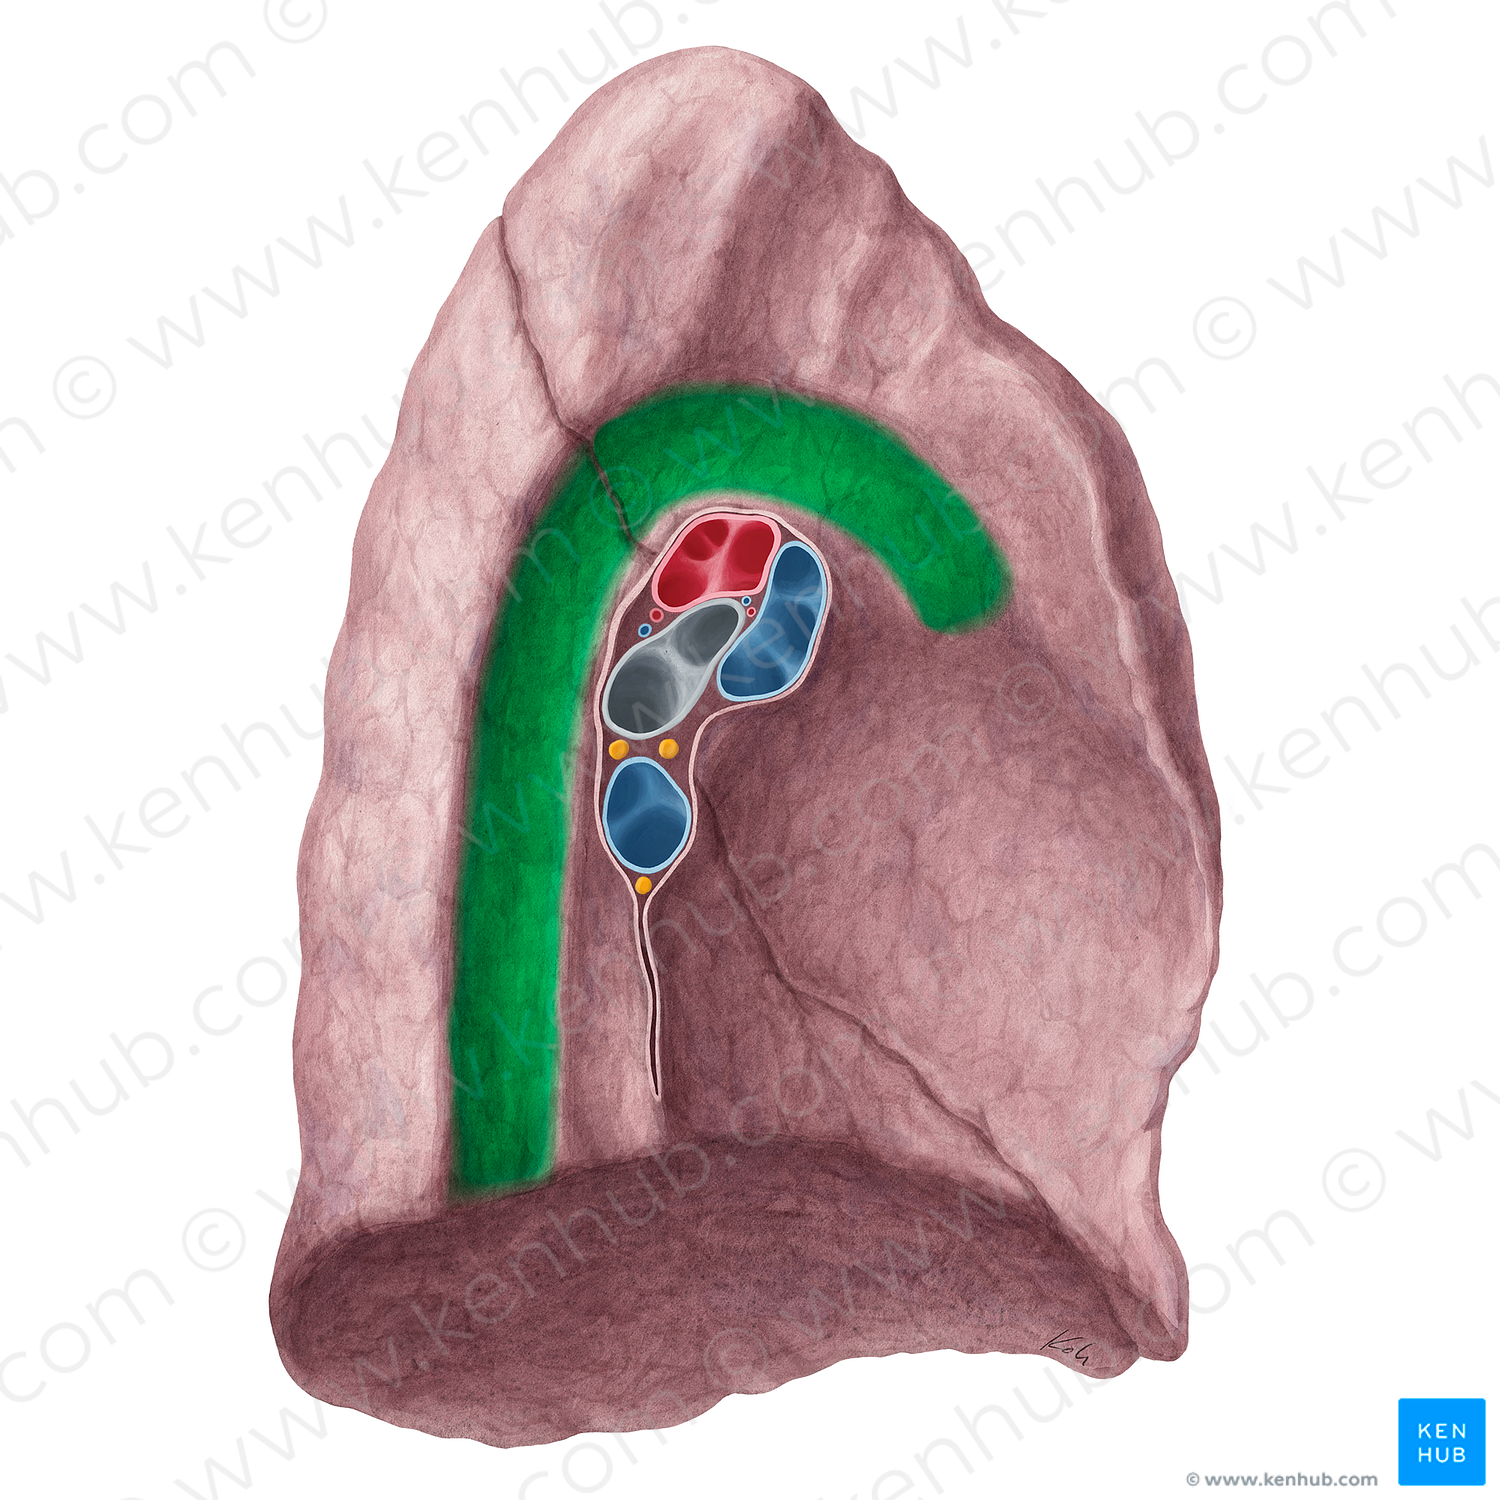 Aortic impression of left lung (#21327)